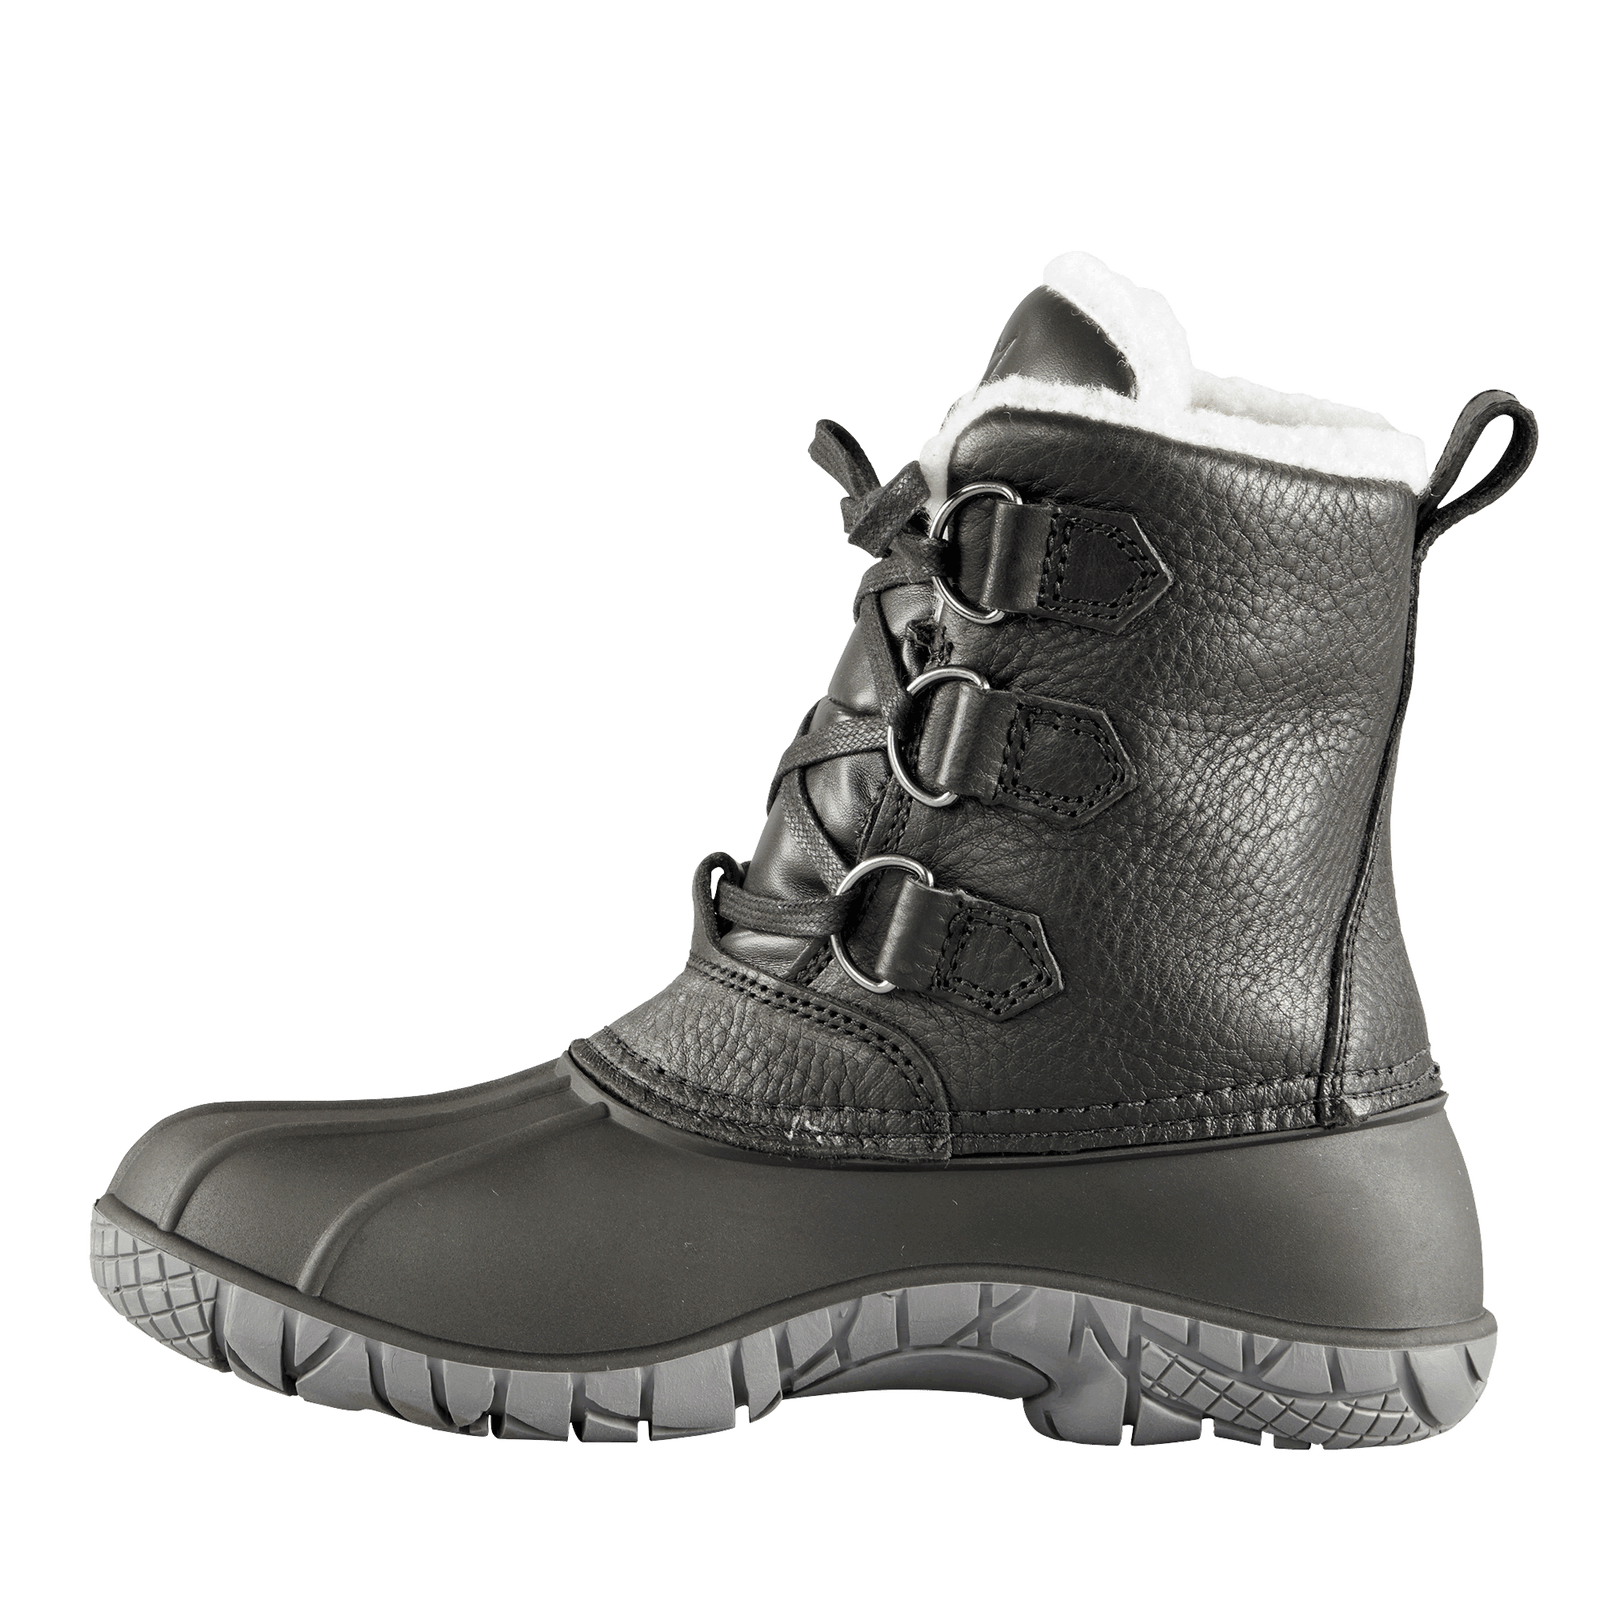 YELLOWKNIFE | Women's Boot – Baffin - Born in the North '79